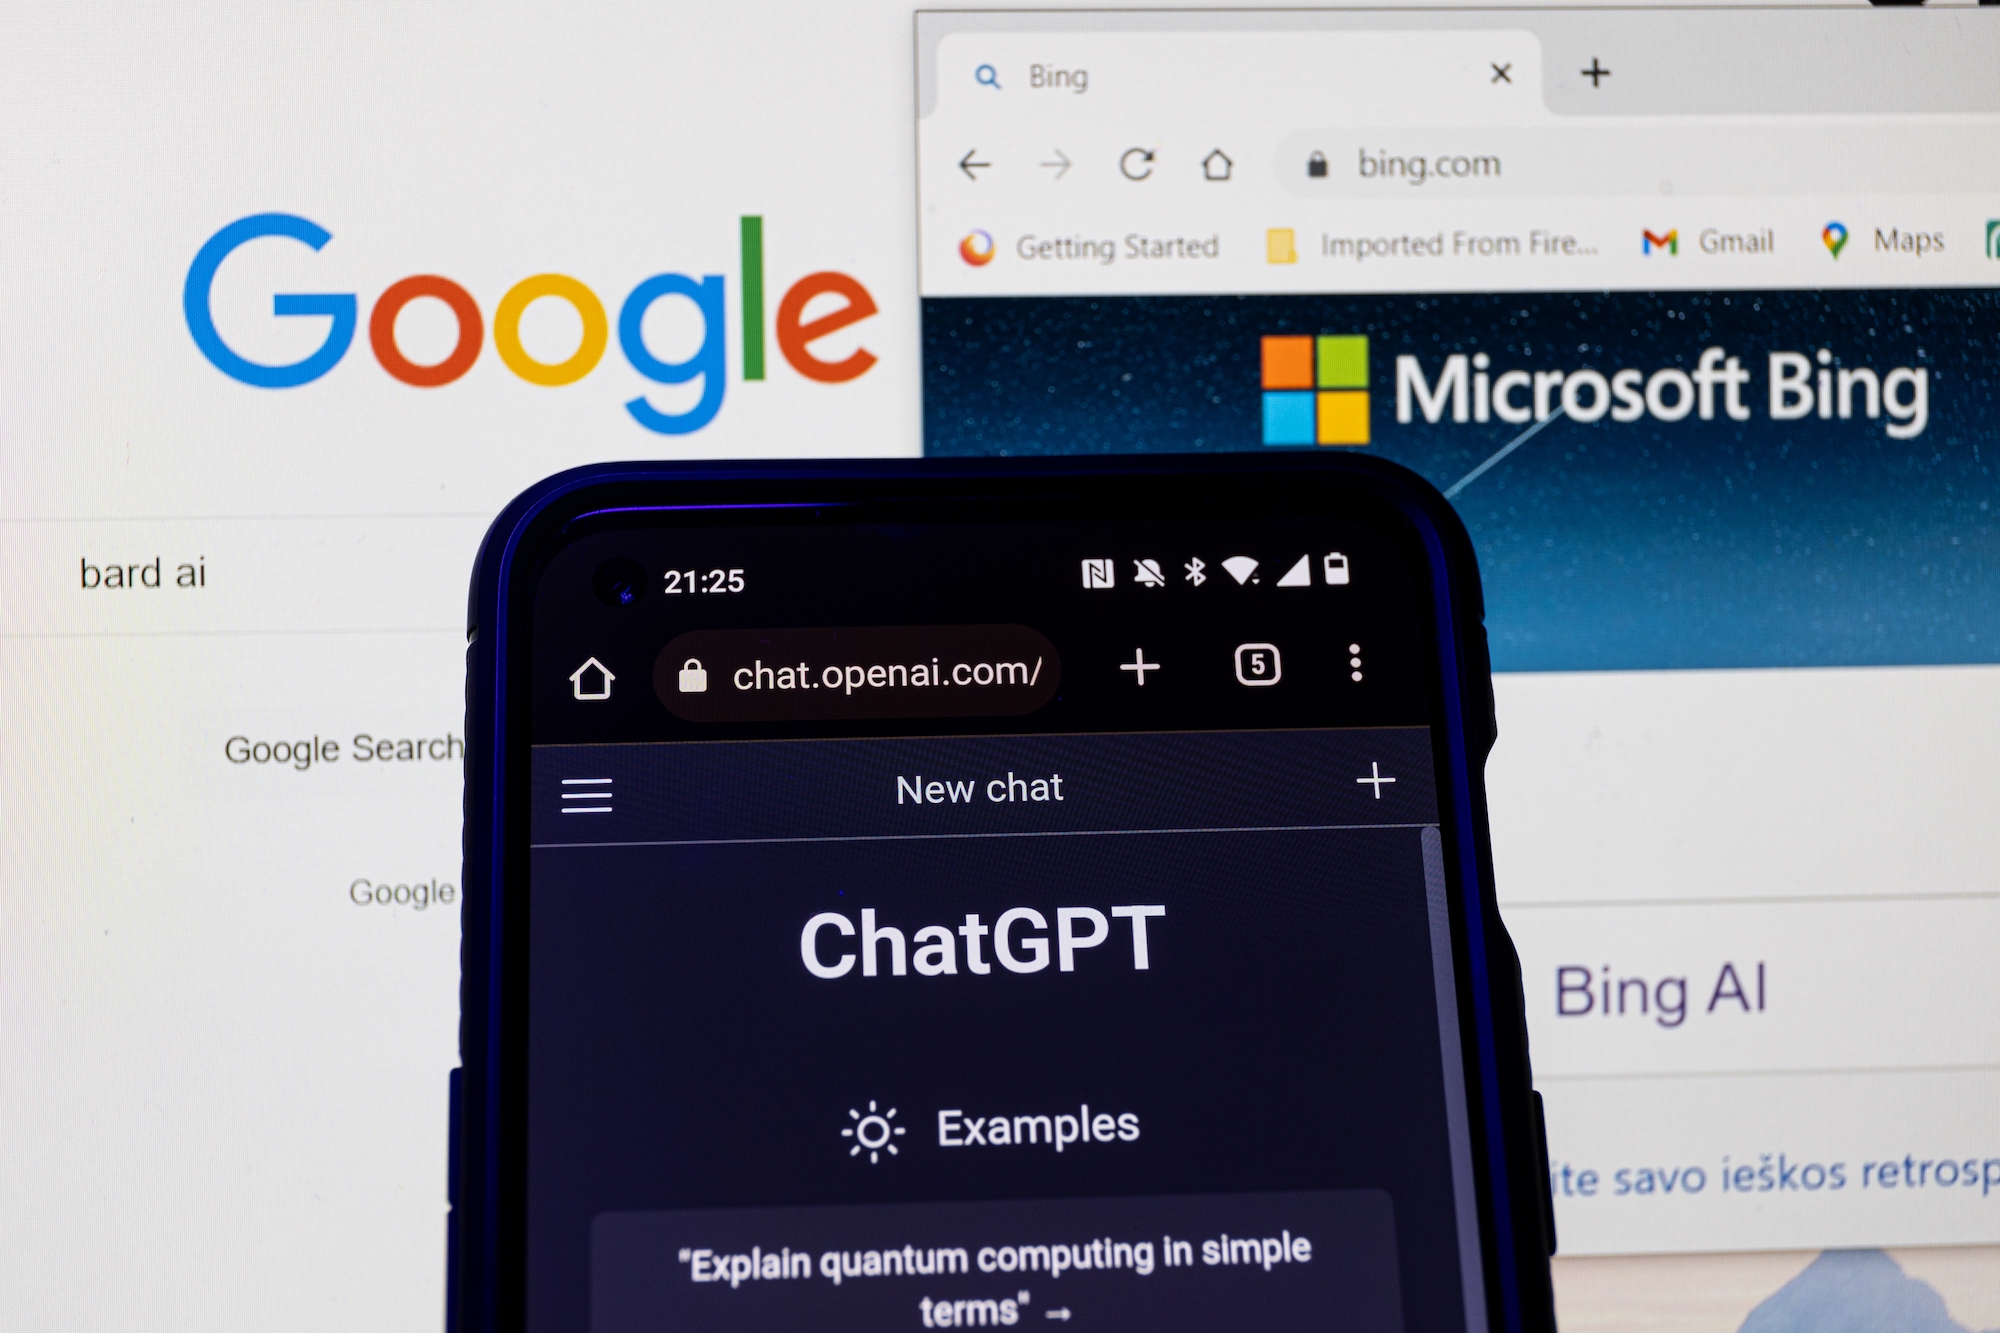 How to Use ChatGPT for Keyword Research